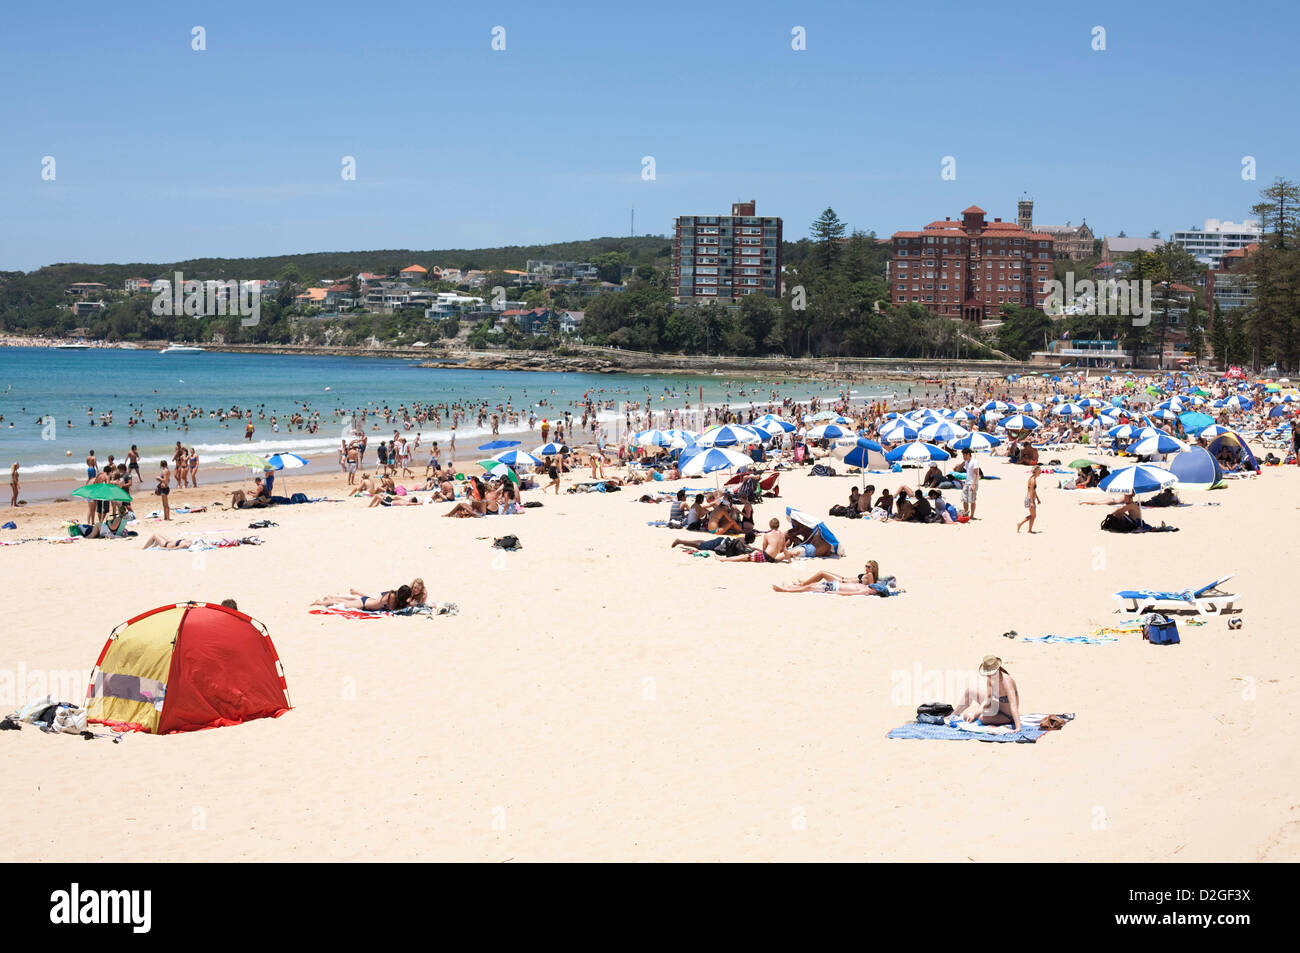 Crowded beach full of sunbathers and swimmers at Australia's iconic Manly Beach Sydney Australia Stock Photo